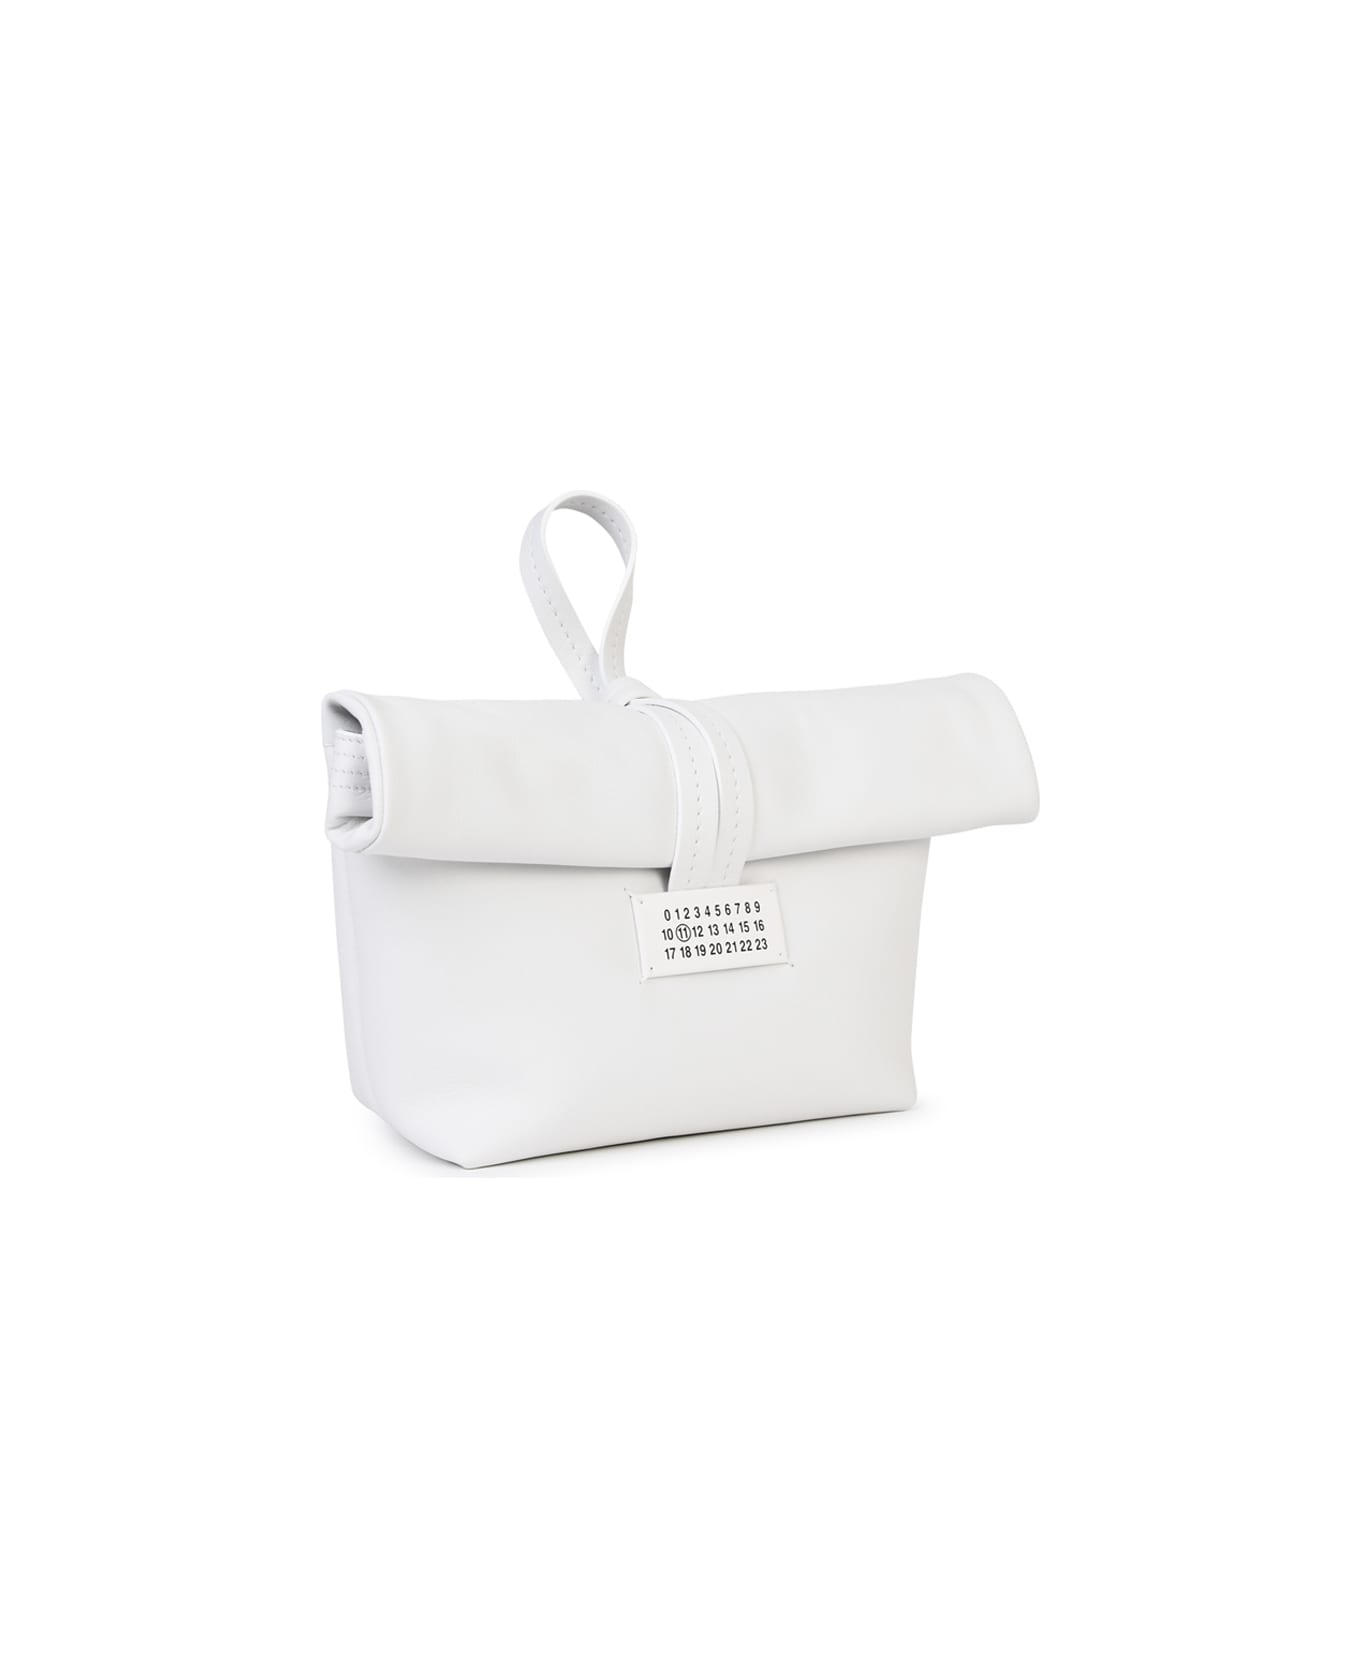 Maison Margiela Clutch In White Leather - WHITE クラッチバッグ